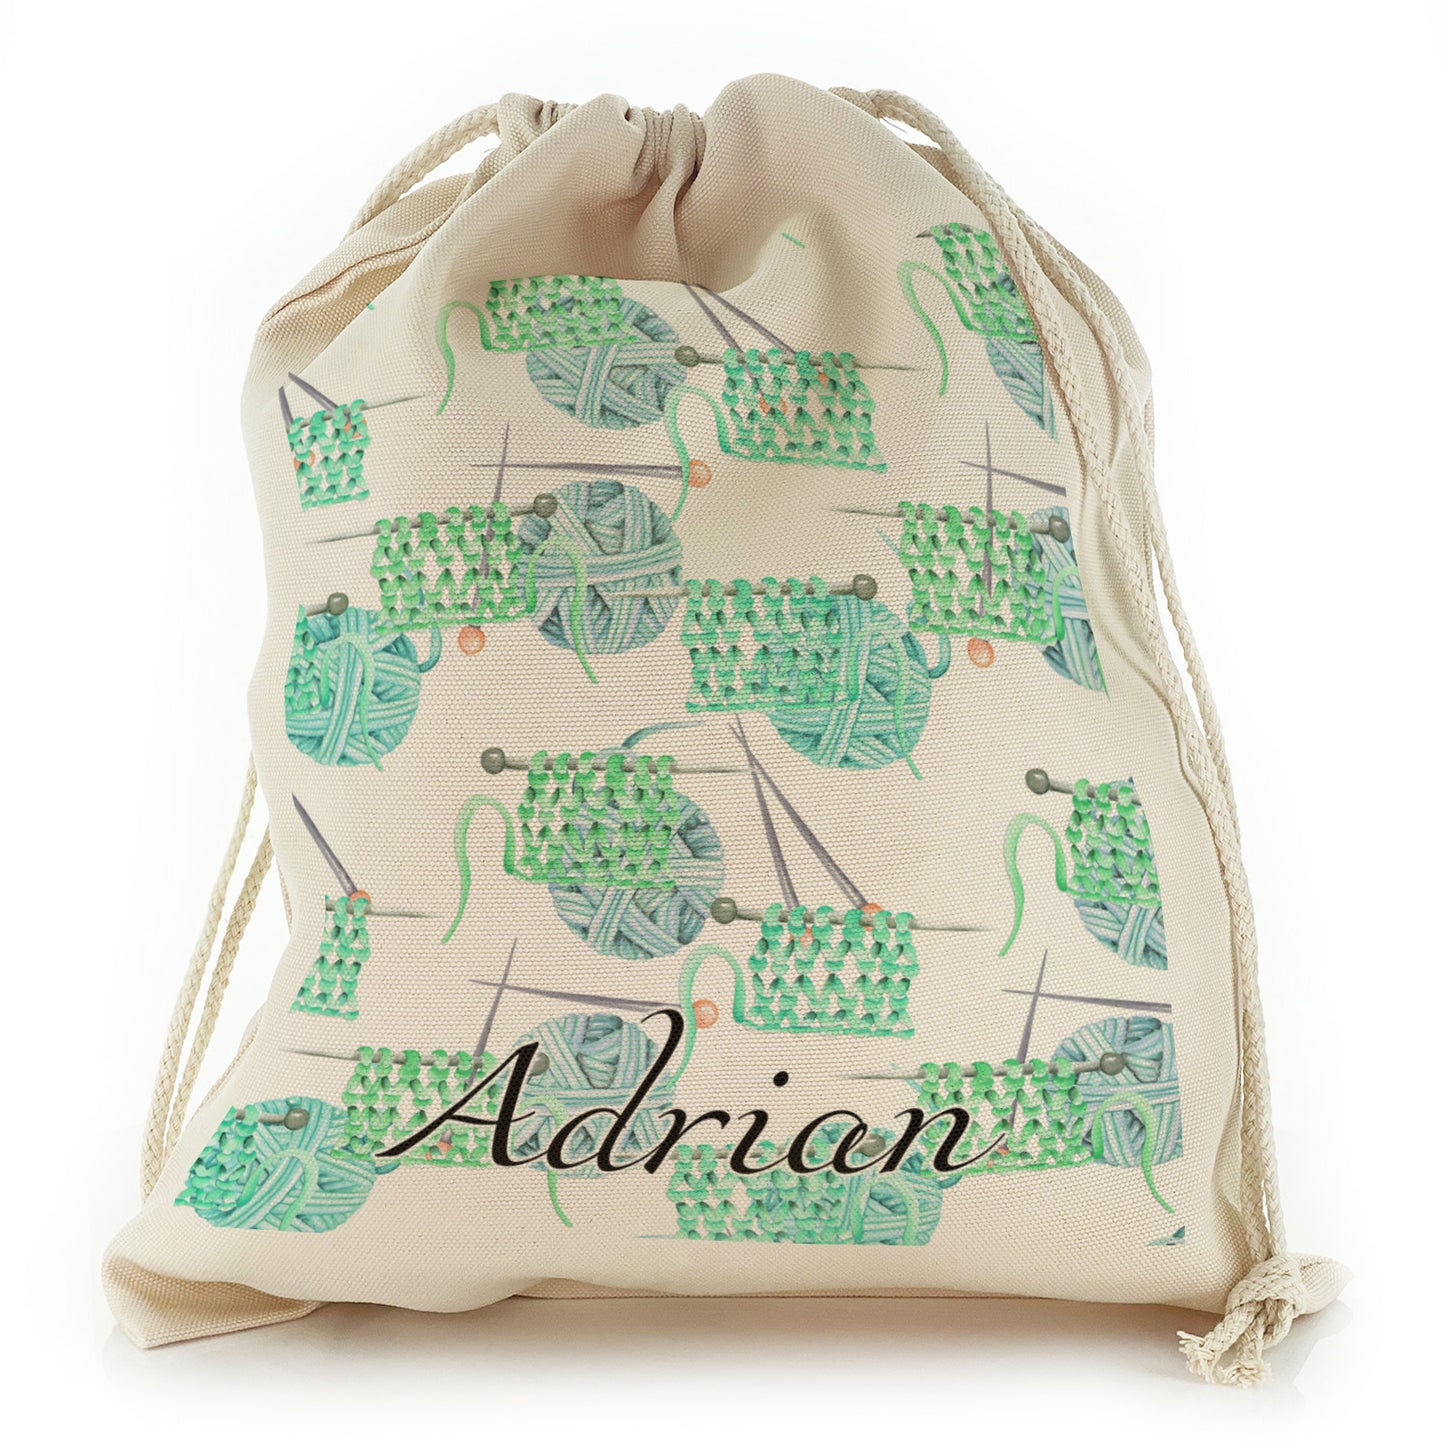 Personalised Canvas Sack with Stylish Text on Green Knitted Yarn and Ball Pattern 